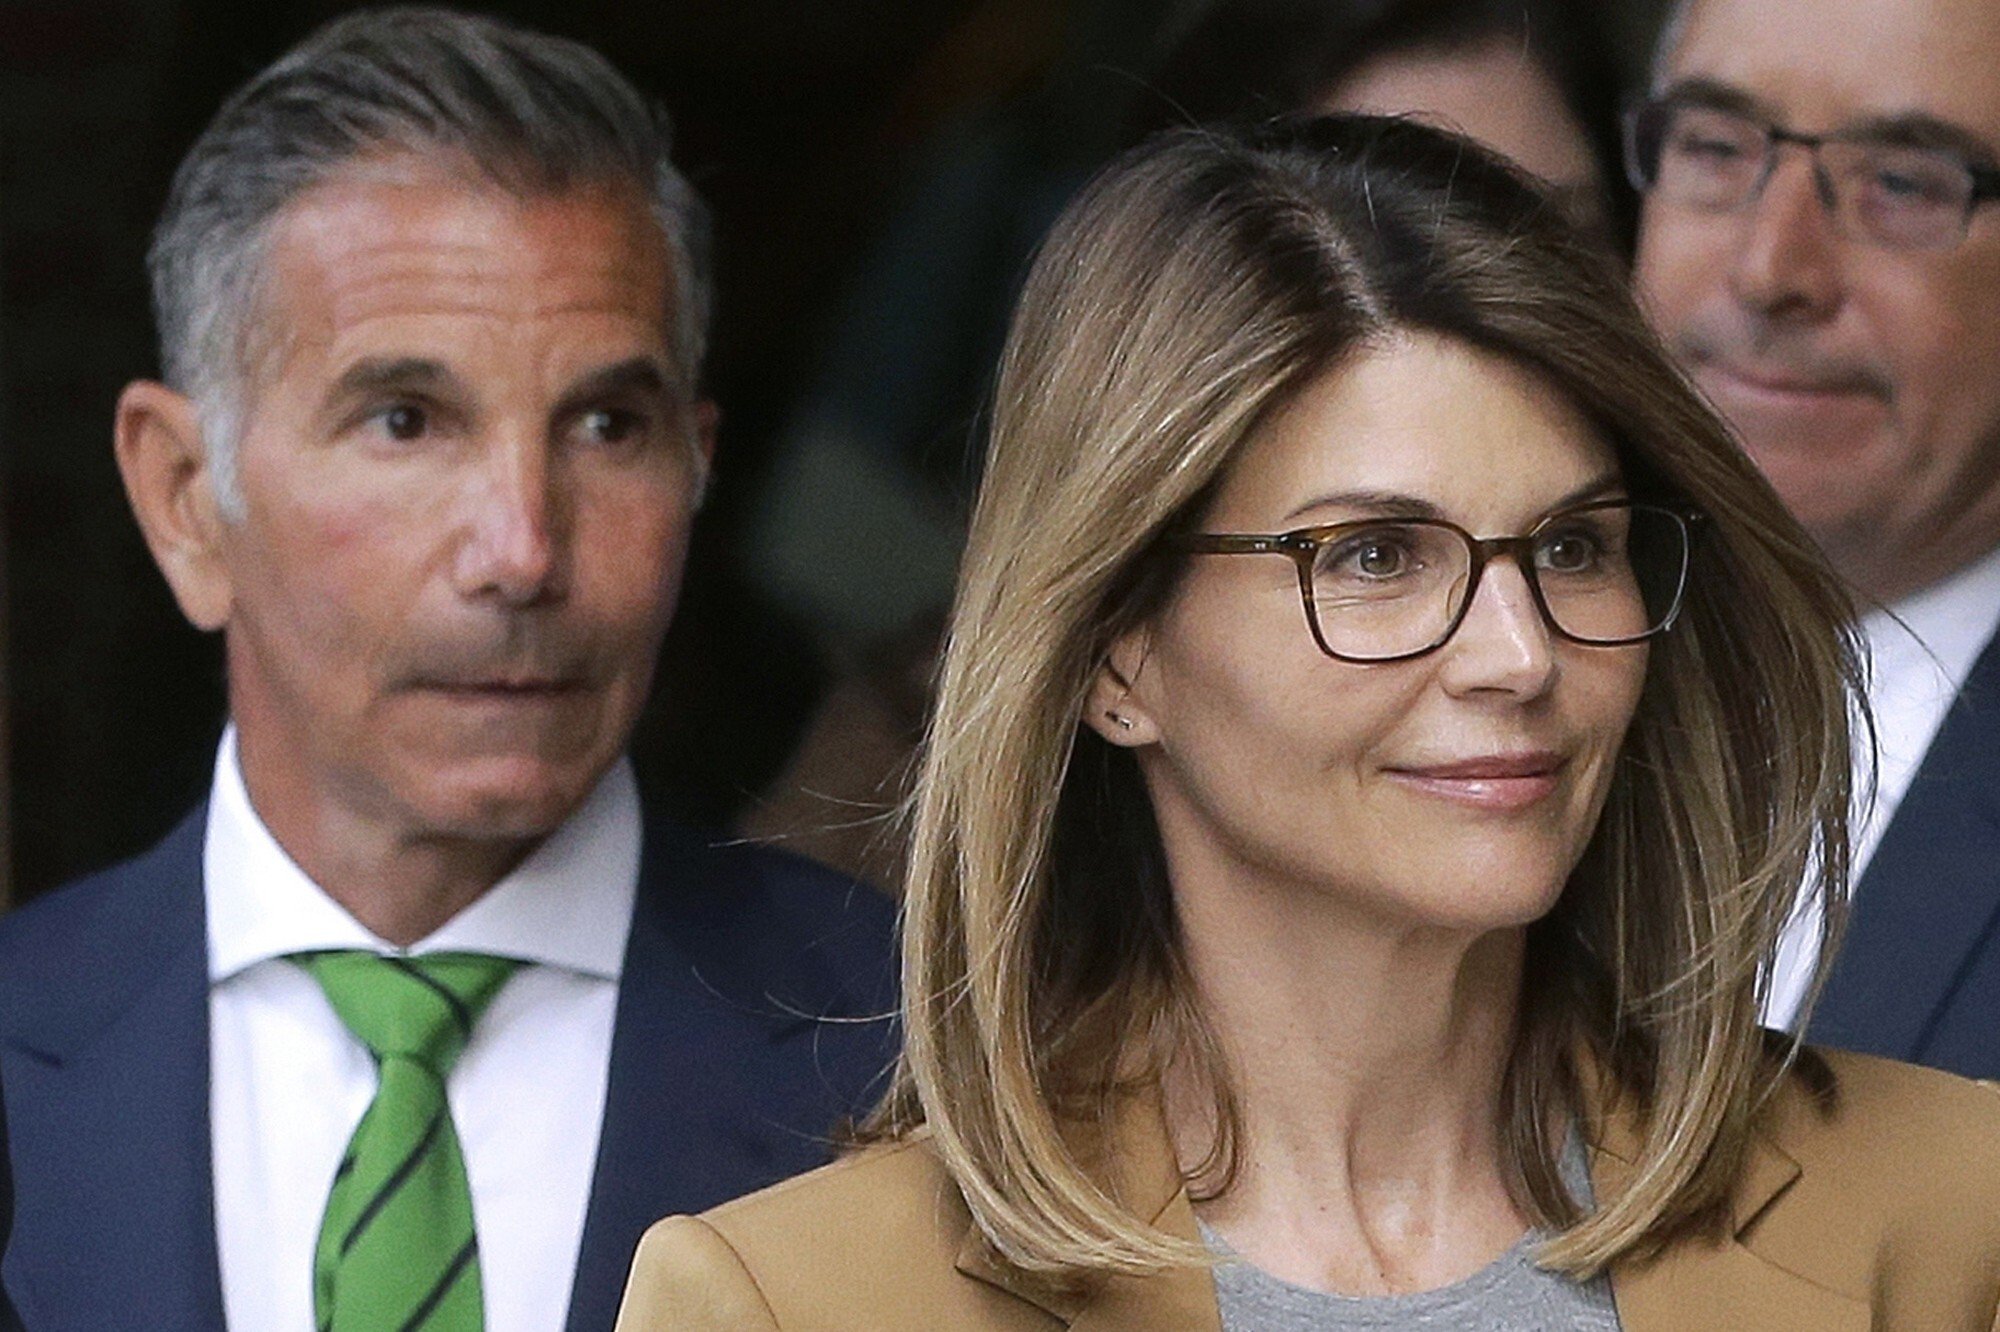 Actress Lori Loughlin and her husband, clothing designer Mossimo Giannulli, leave federal court in Boston in April 2019. Photo: AP